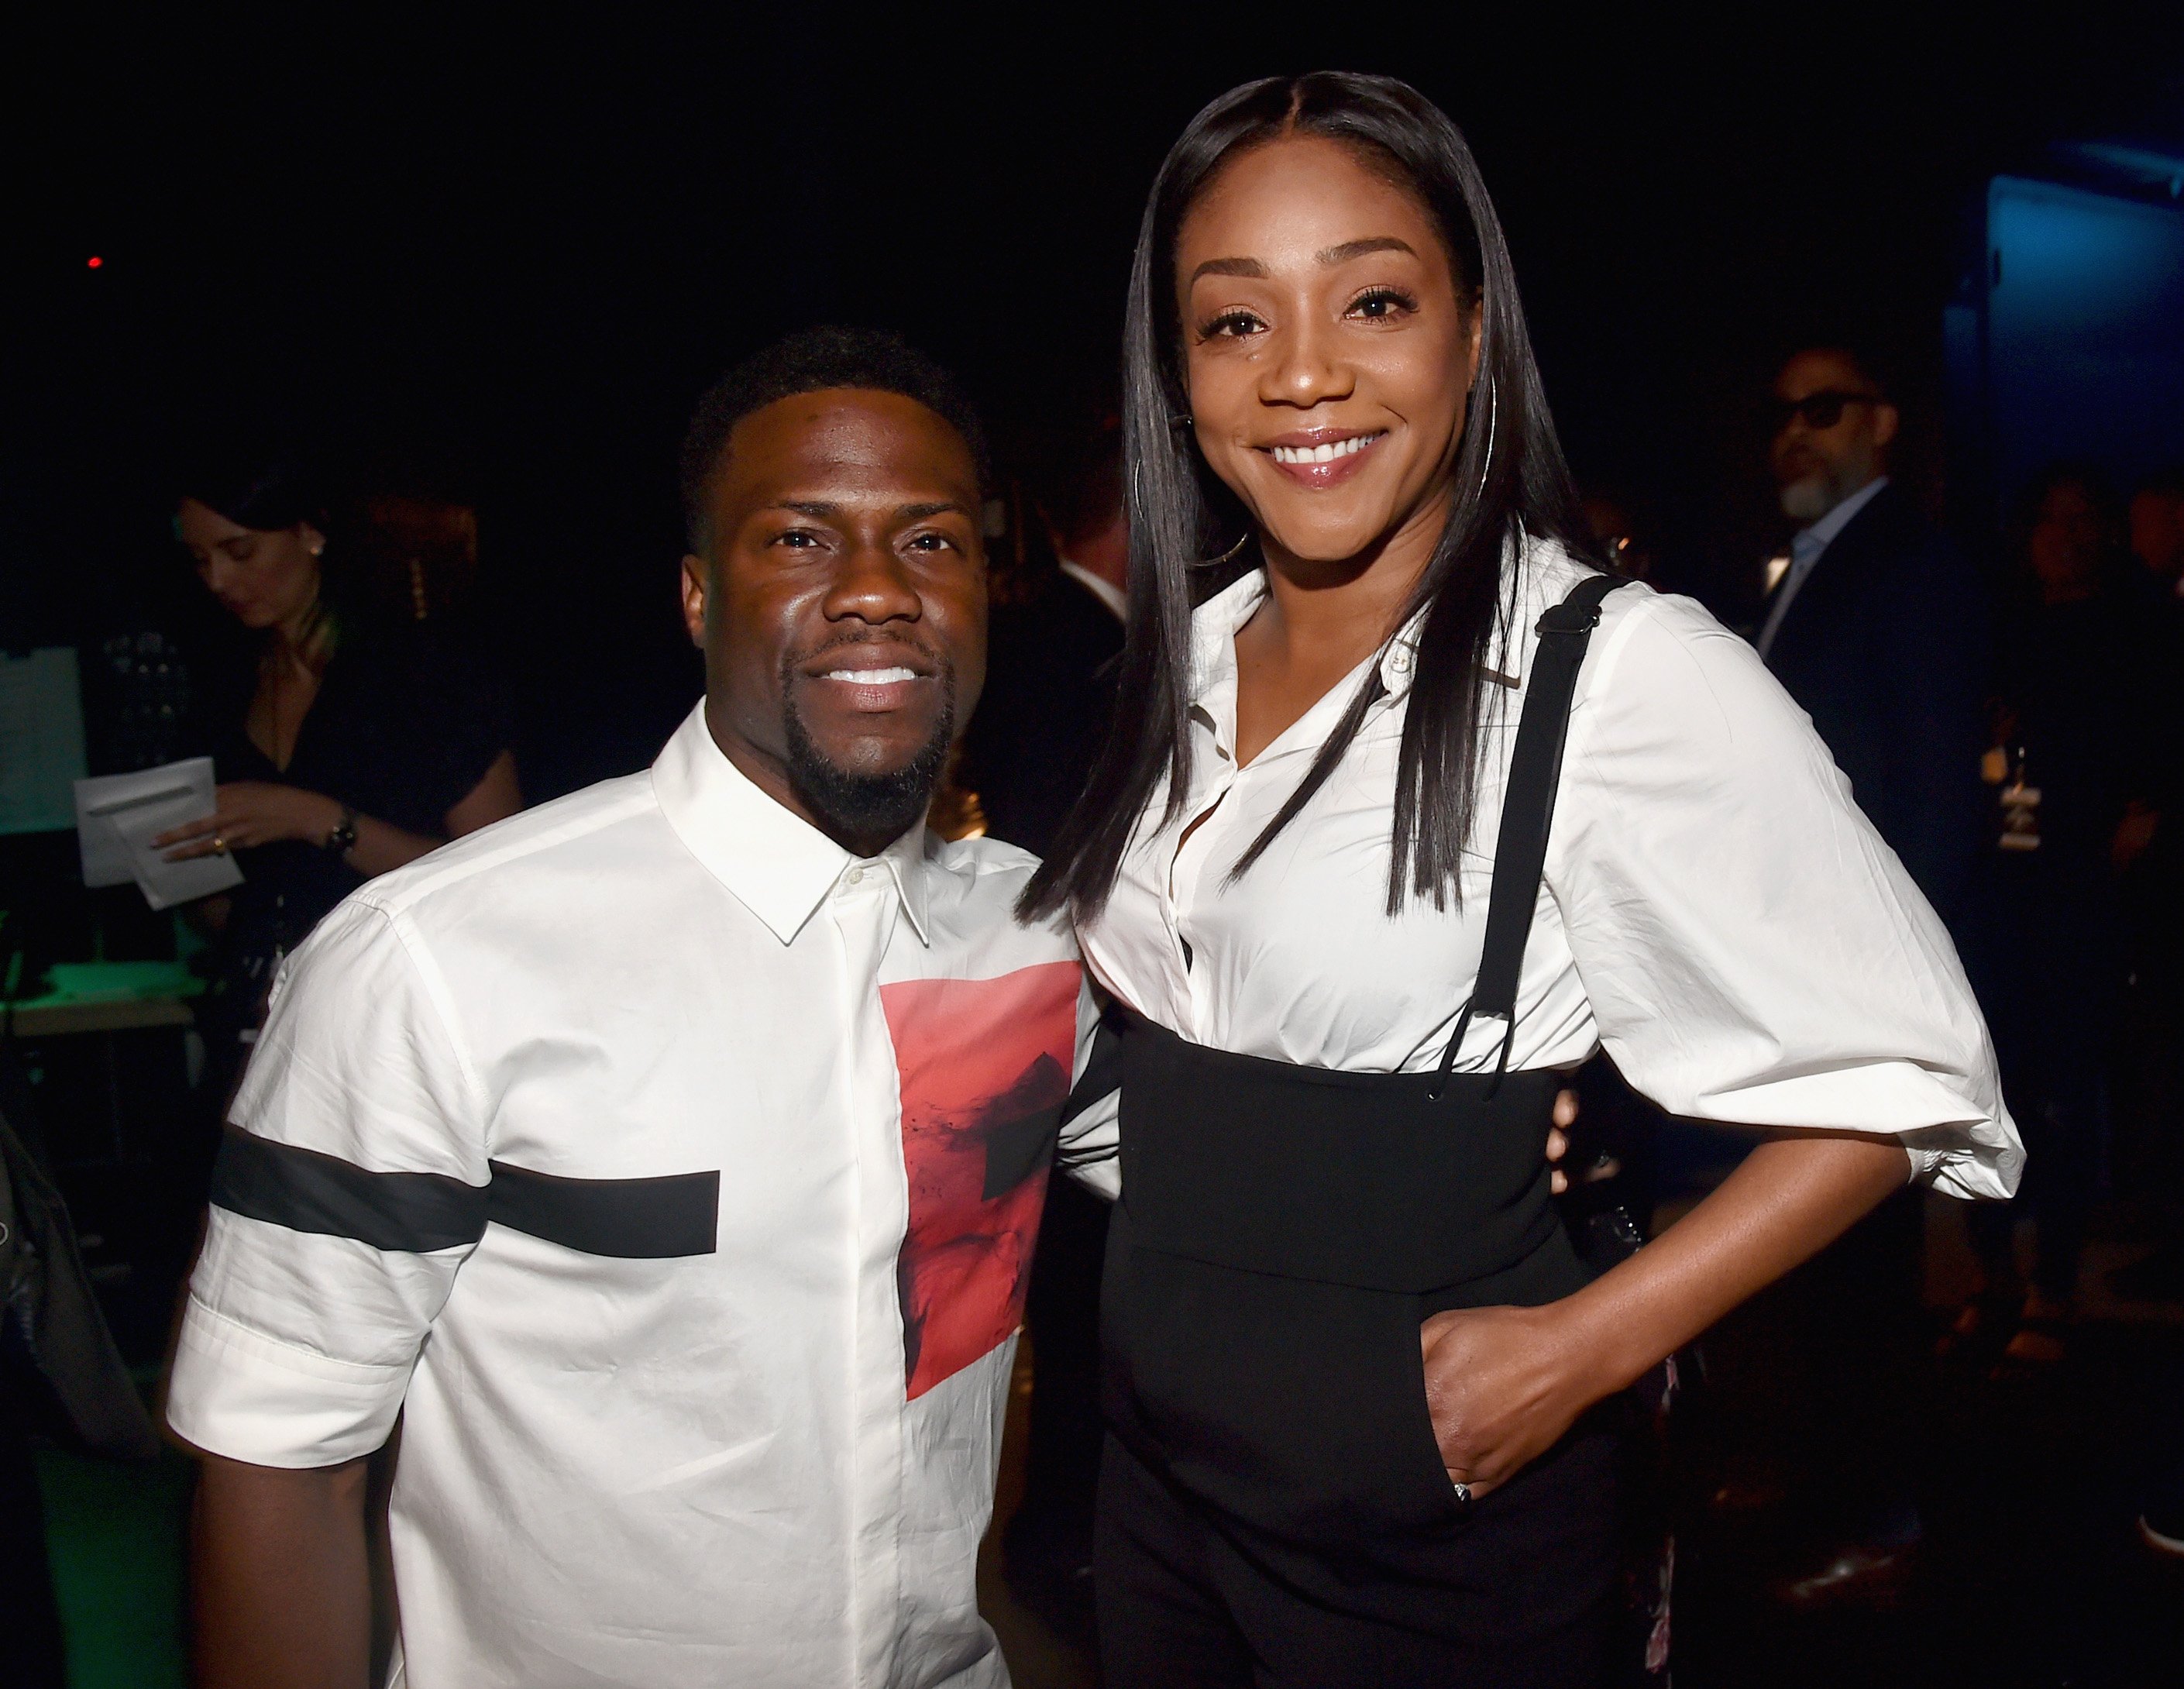 Actors Kevin Hart and Tiffany Haddish on April 25, 2018  at The Colosseum at Caesars Palace during CinemaCon, in Las Vegas, Nevada | Source: Getty Images